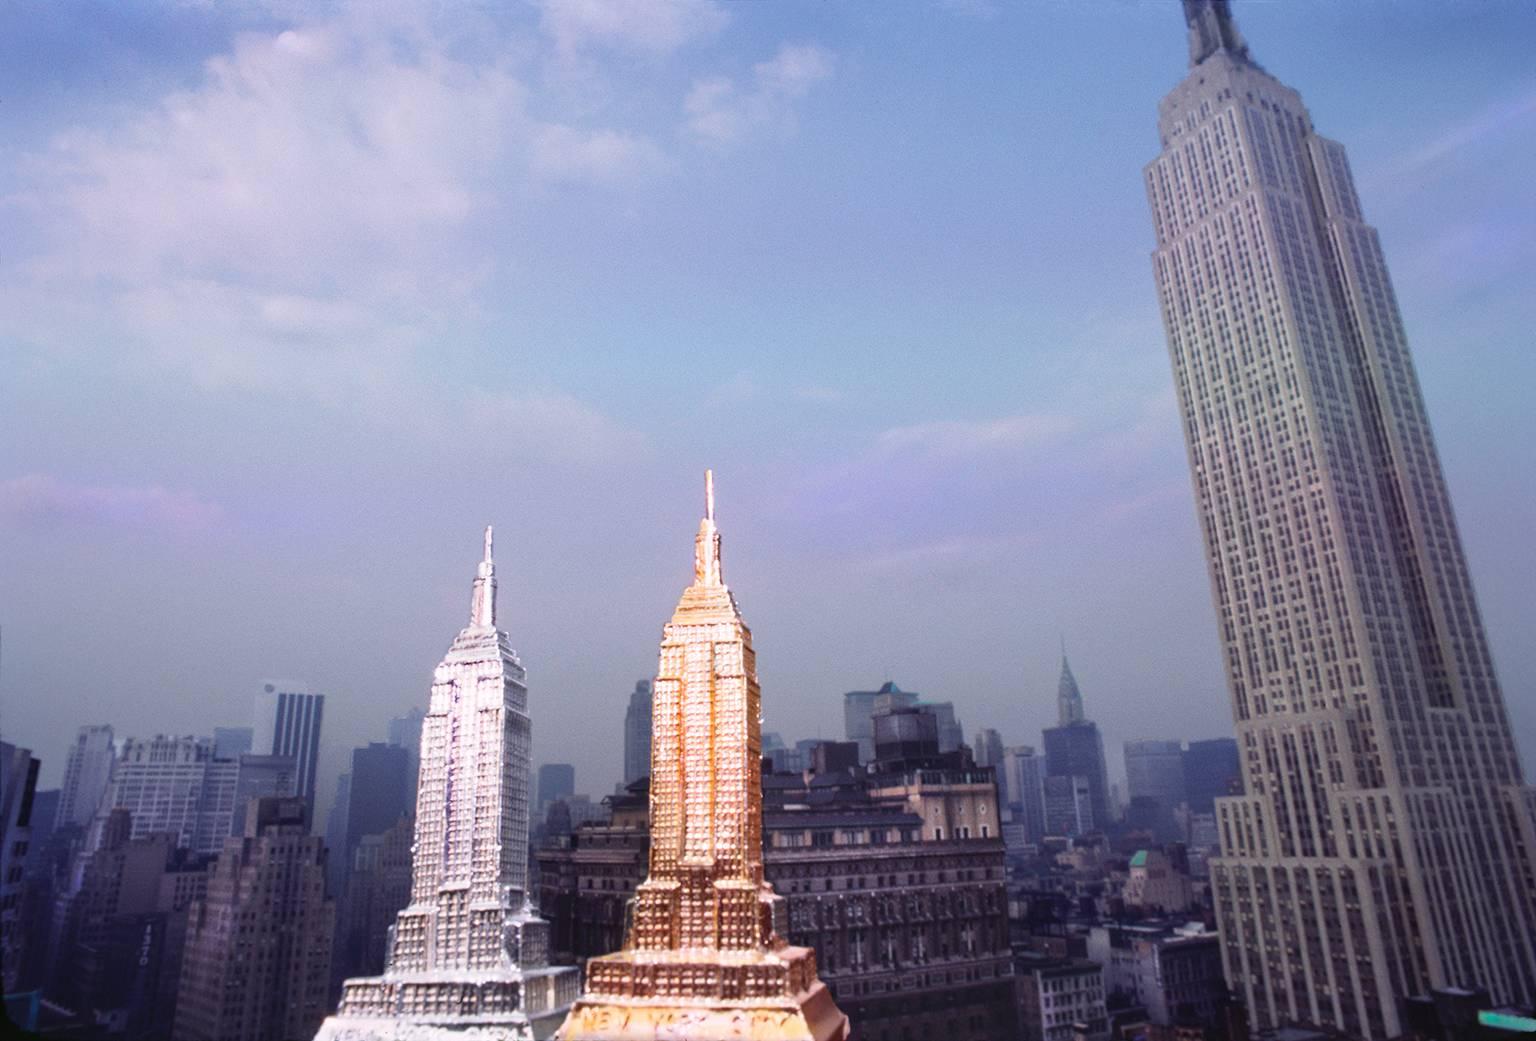 Three Empire State Buildings, 1976